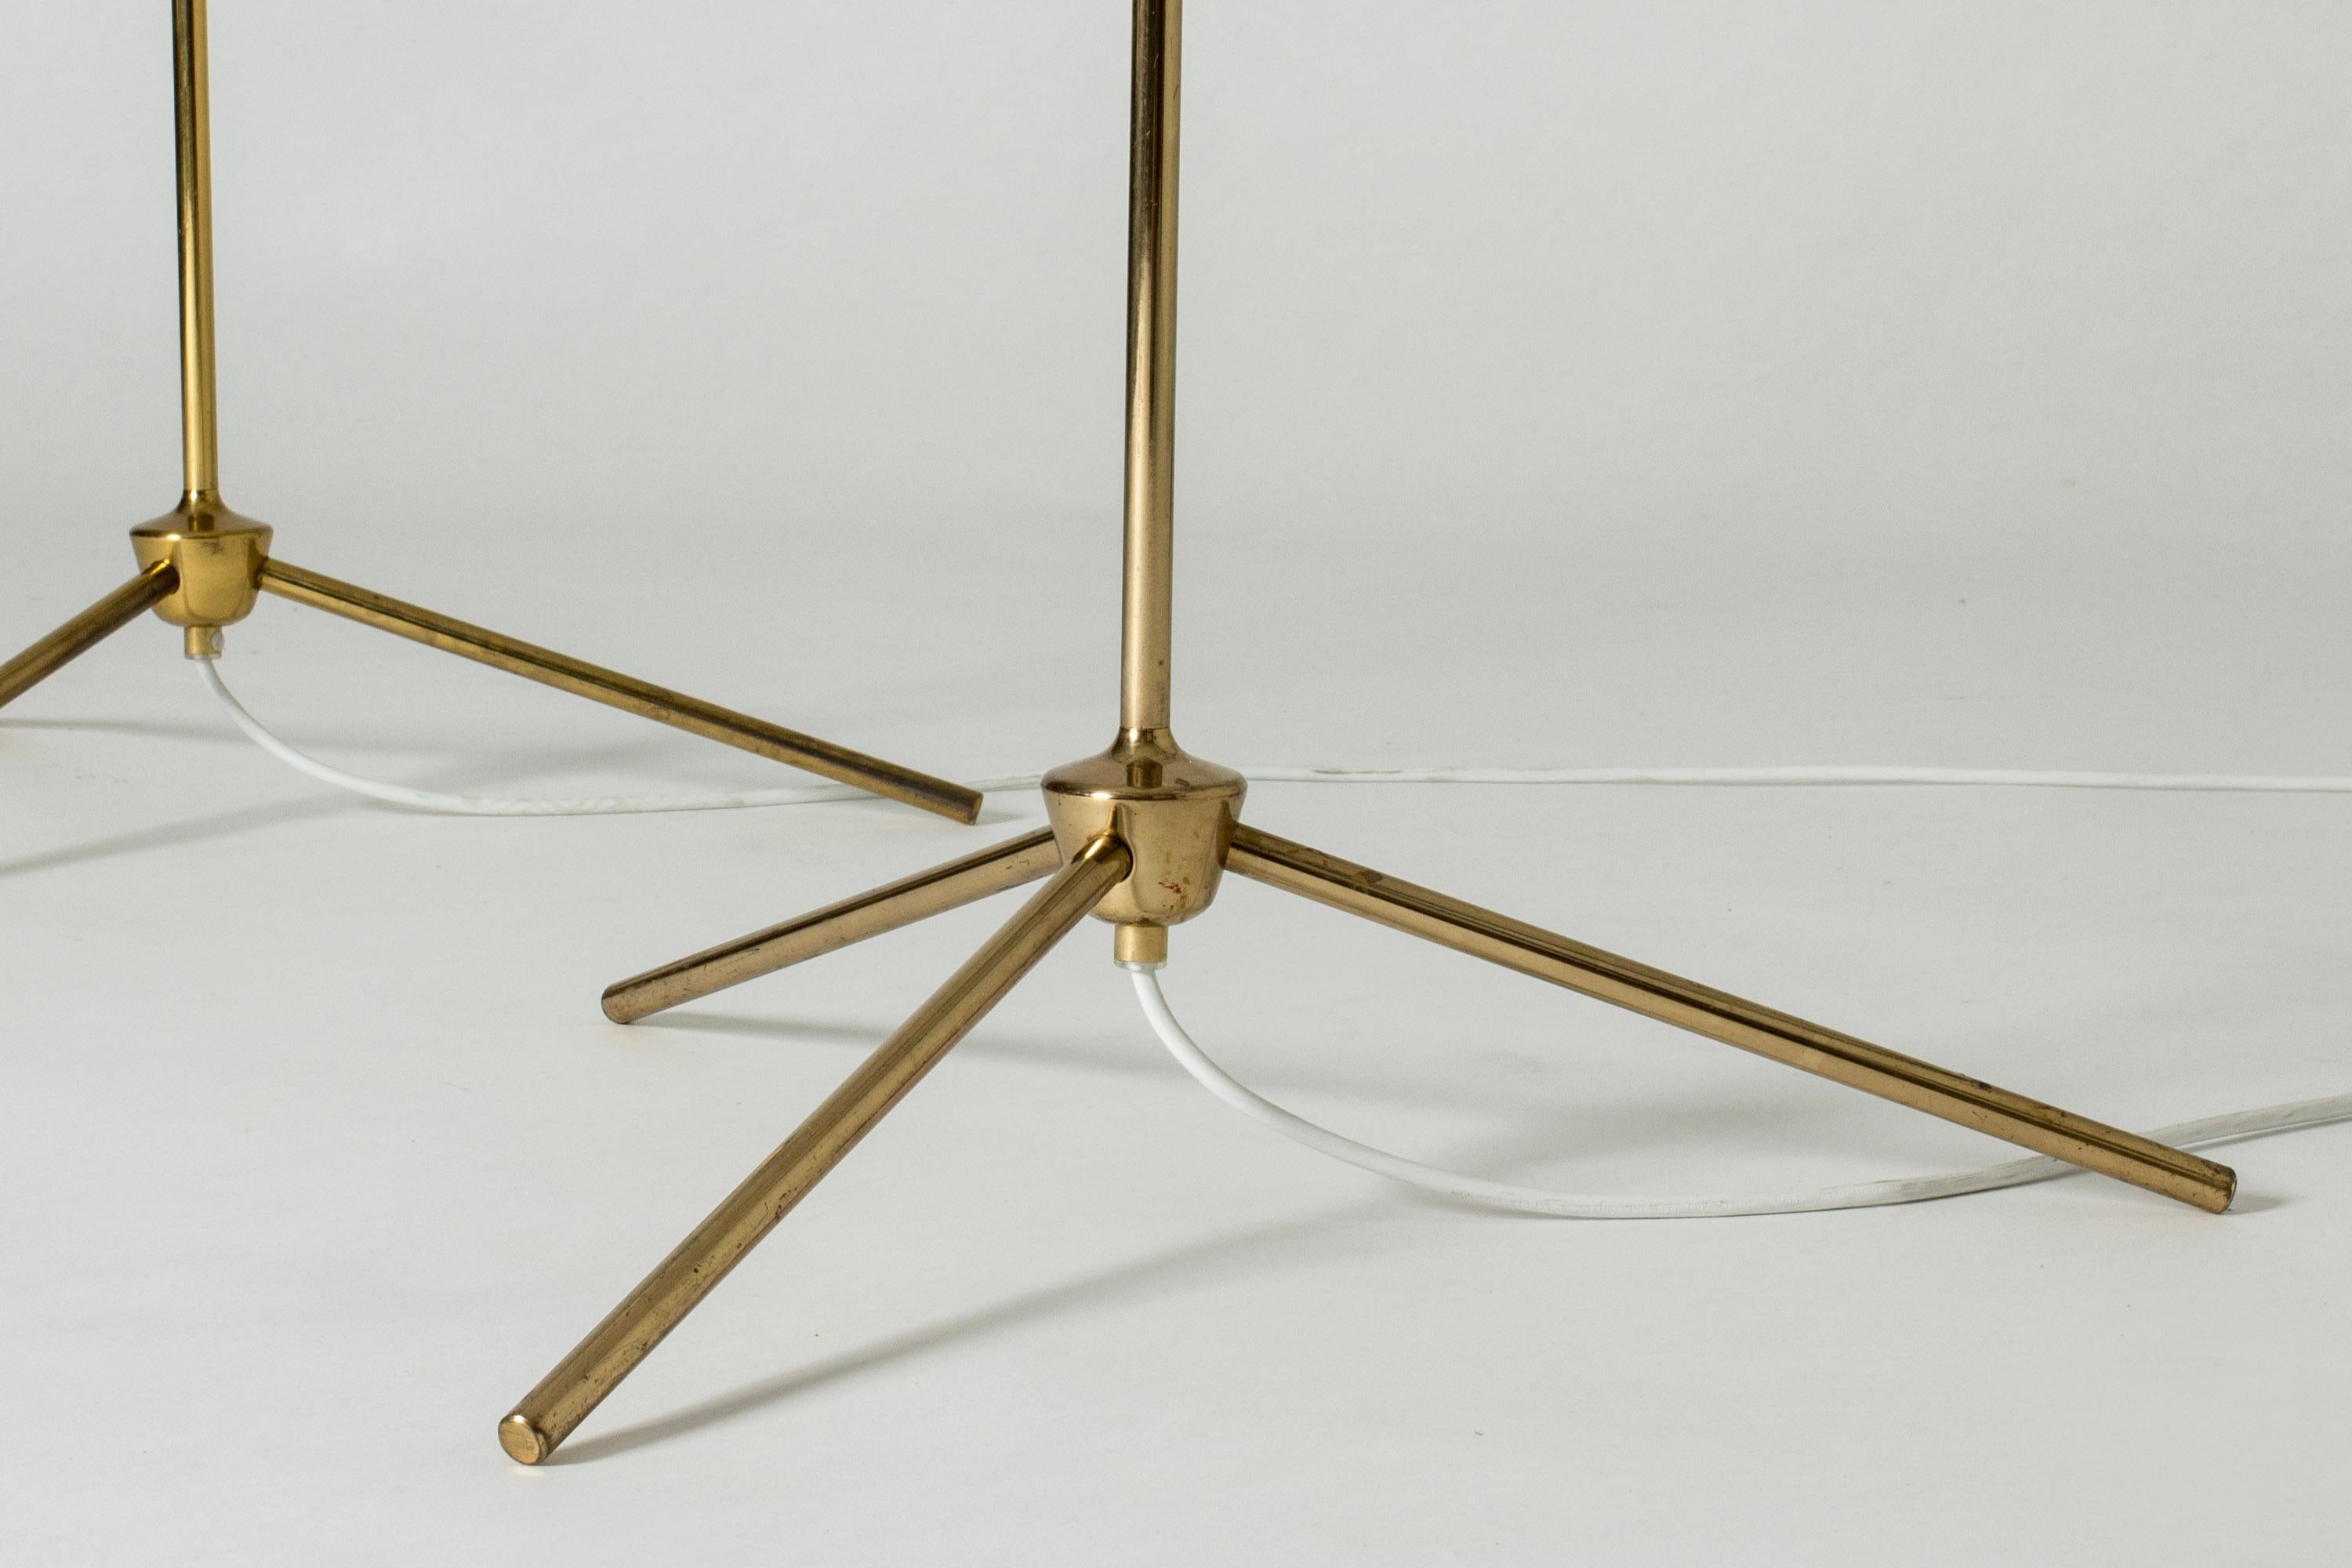 Mid-20th Century Swedish Midcentury Floor Lamps from Bergboms, Sweden, 1950s For Sale